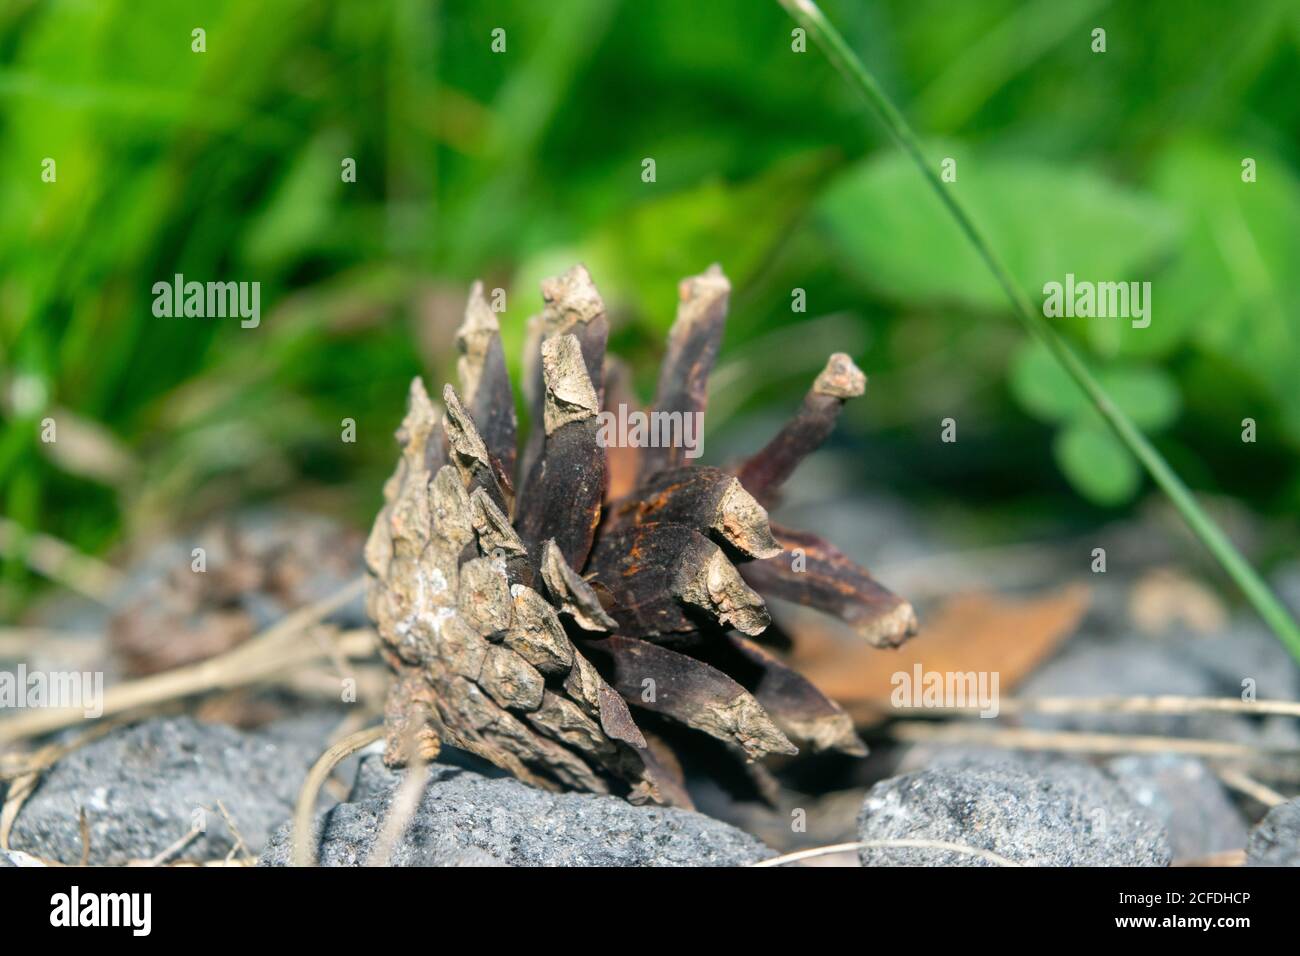 An old dried pine cone that fell from a pine tree lies on the ground against a background of green grass. Close up Stock Photo